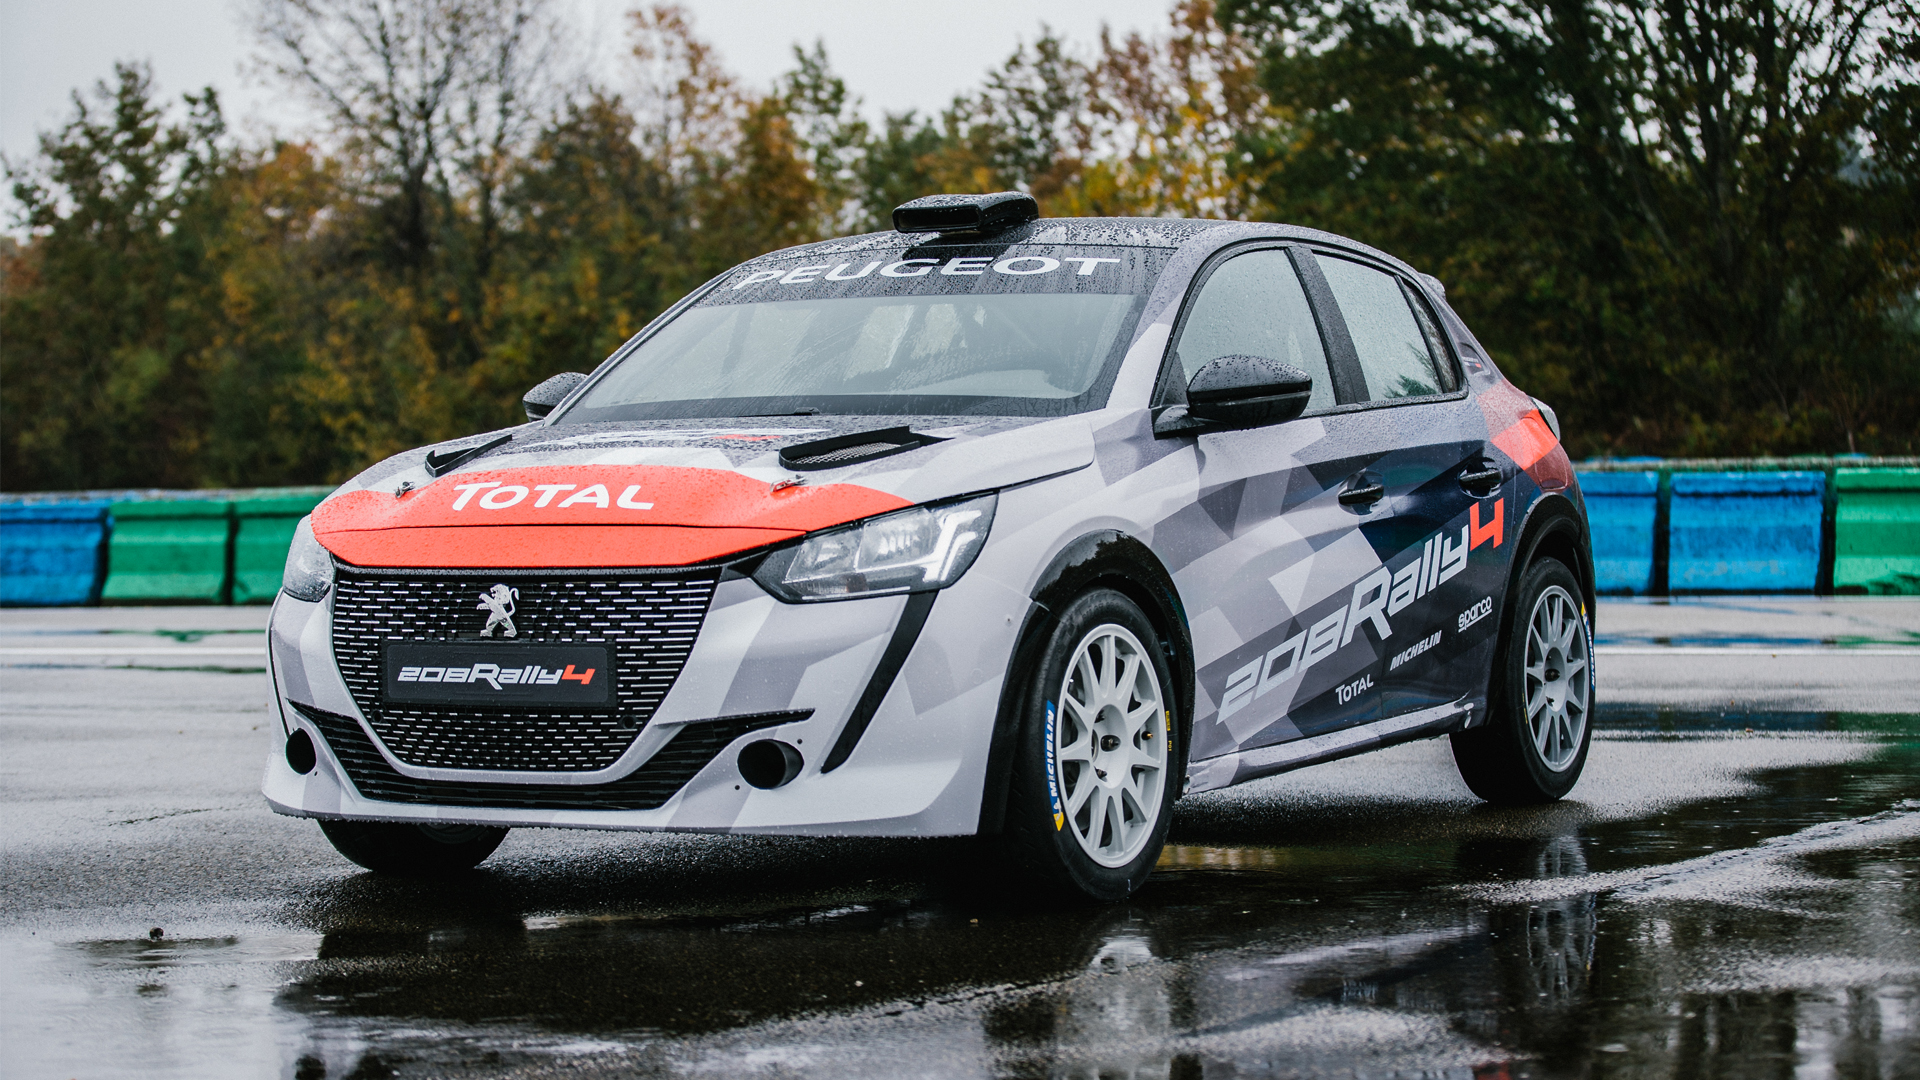 Reveal Peugeot 208 Rally 4